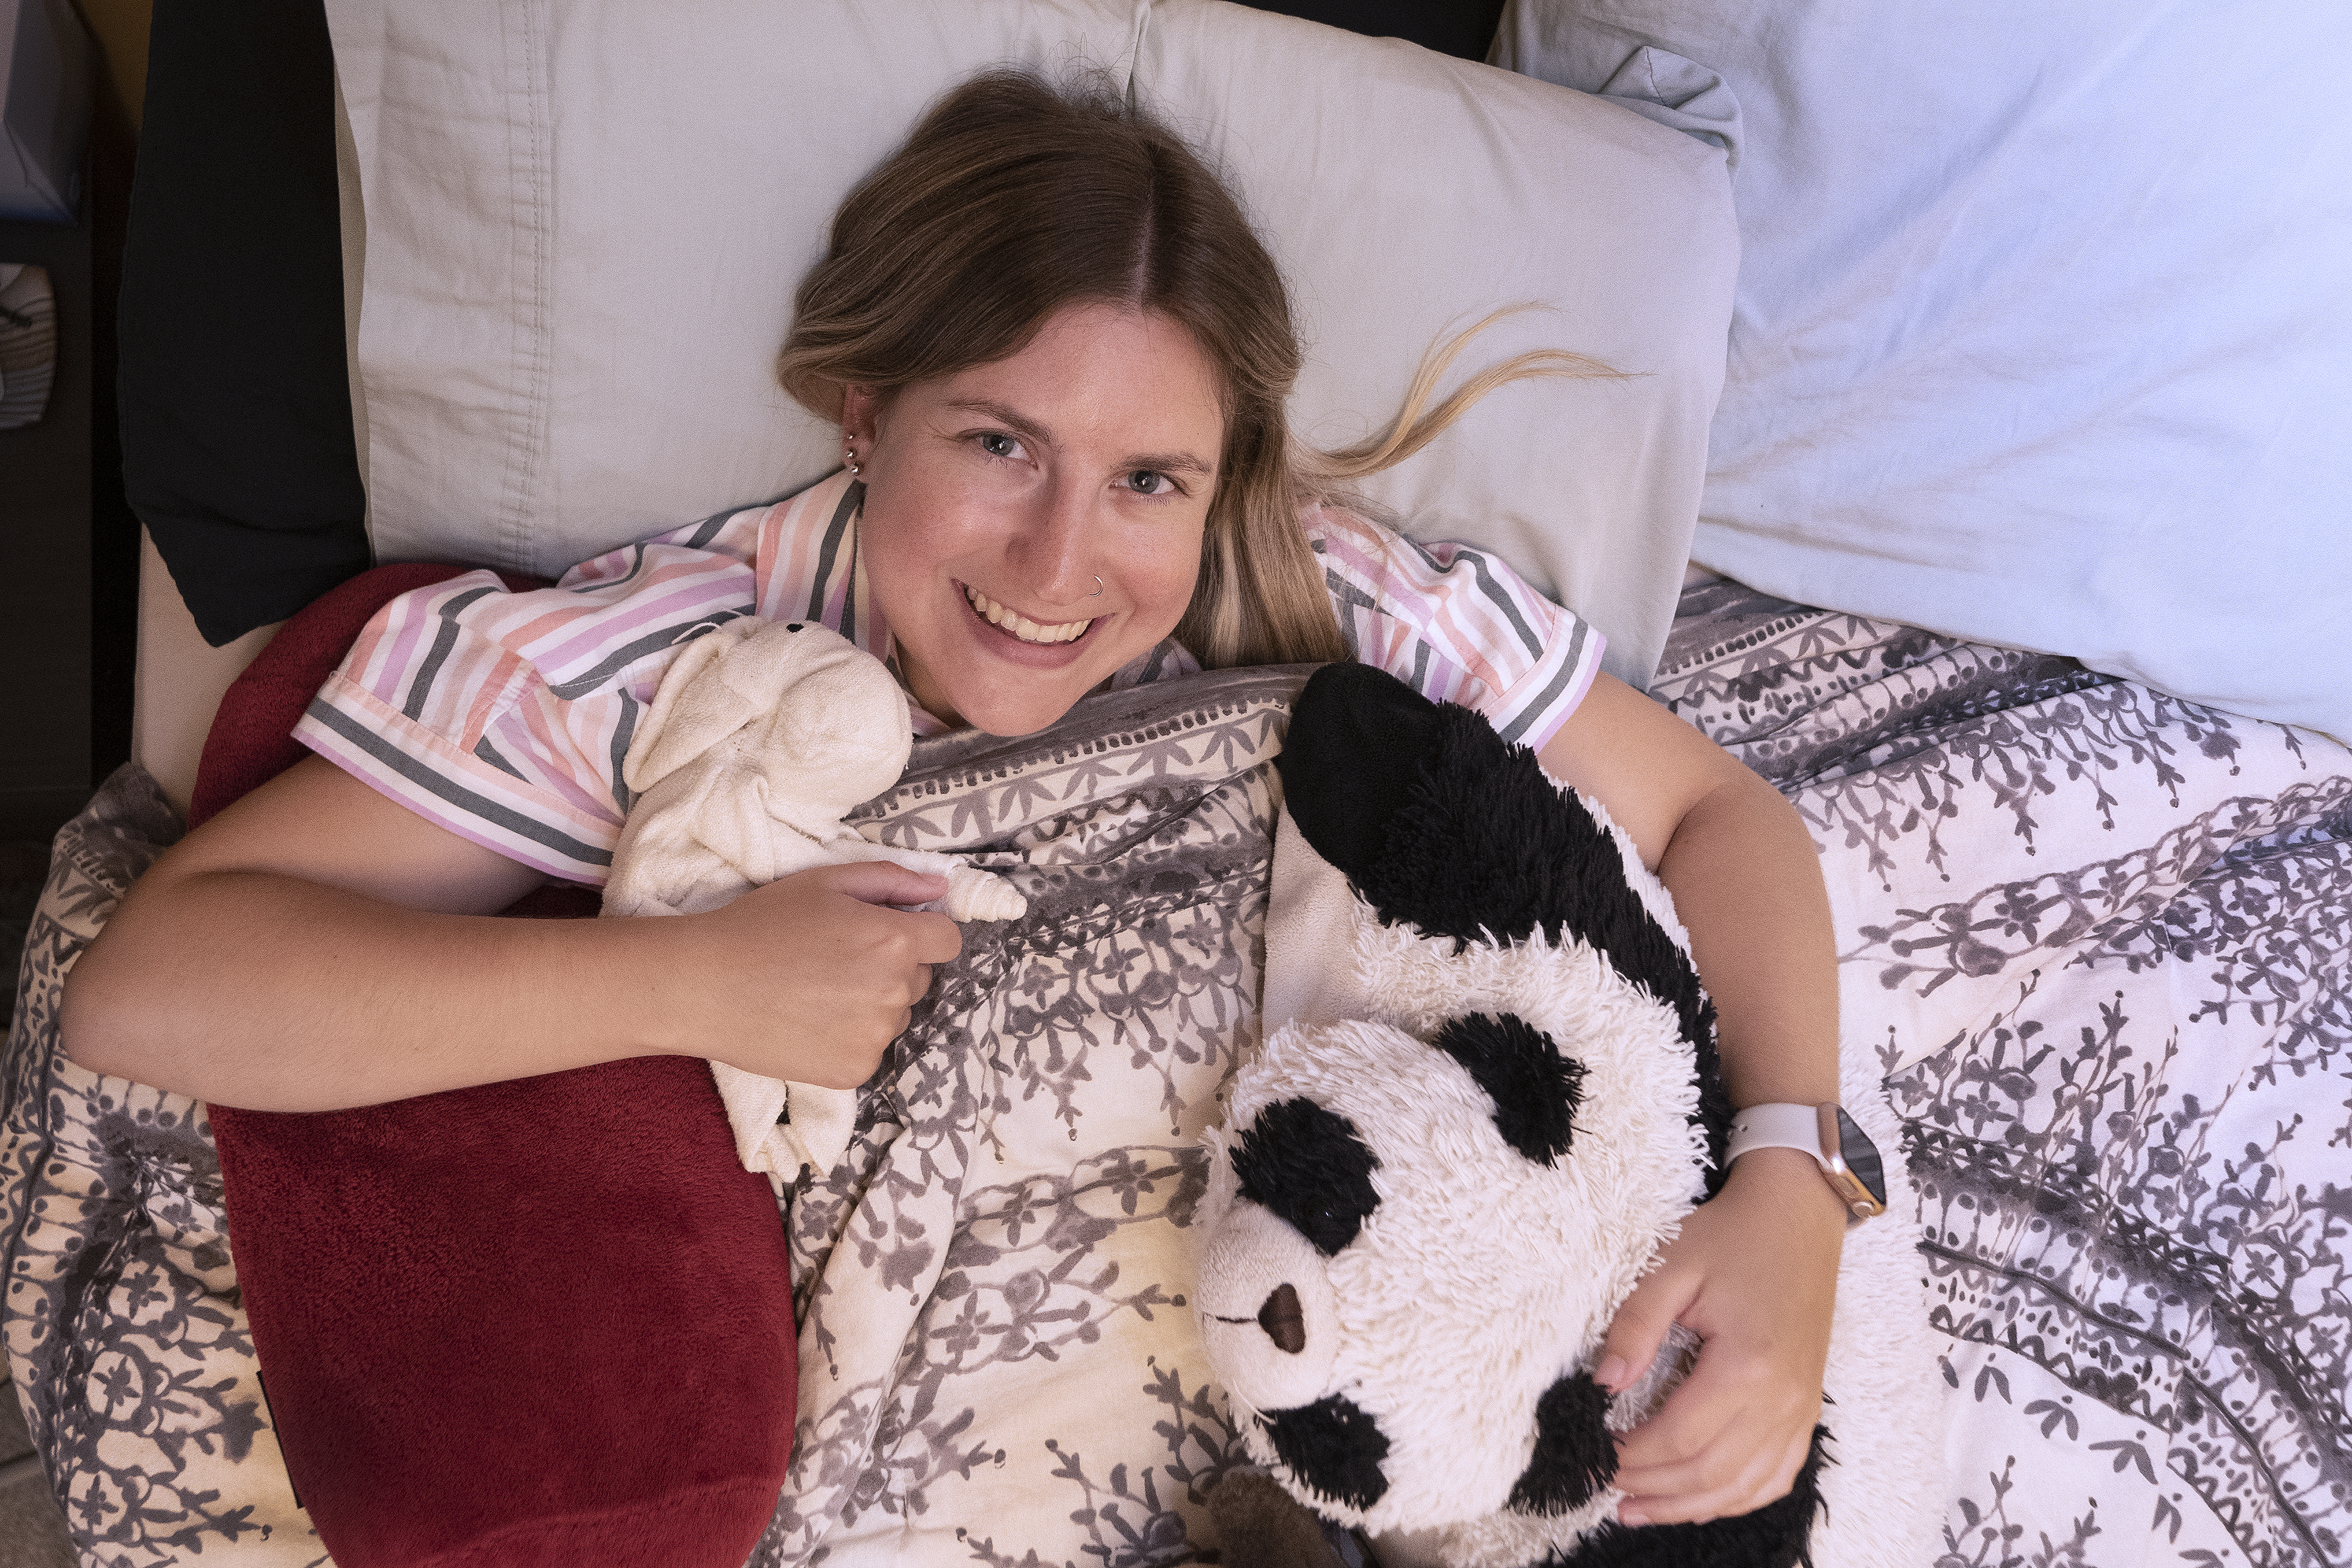 Adults are sleeping with stuffed animals for better sleep, peace